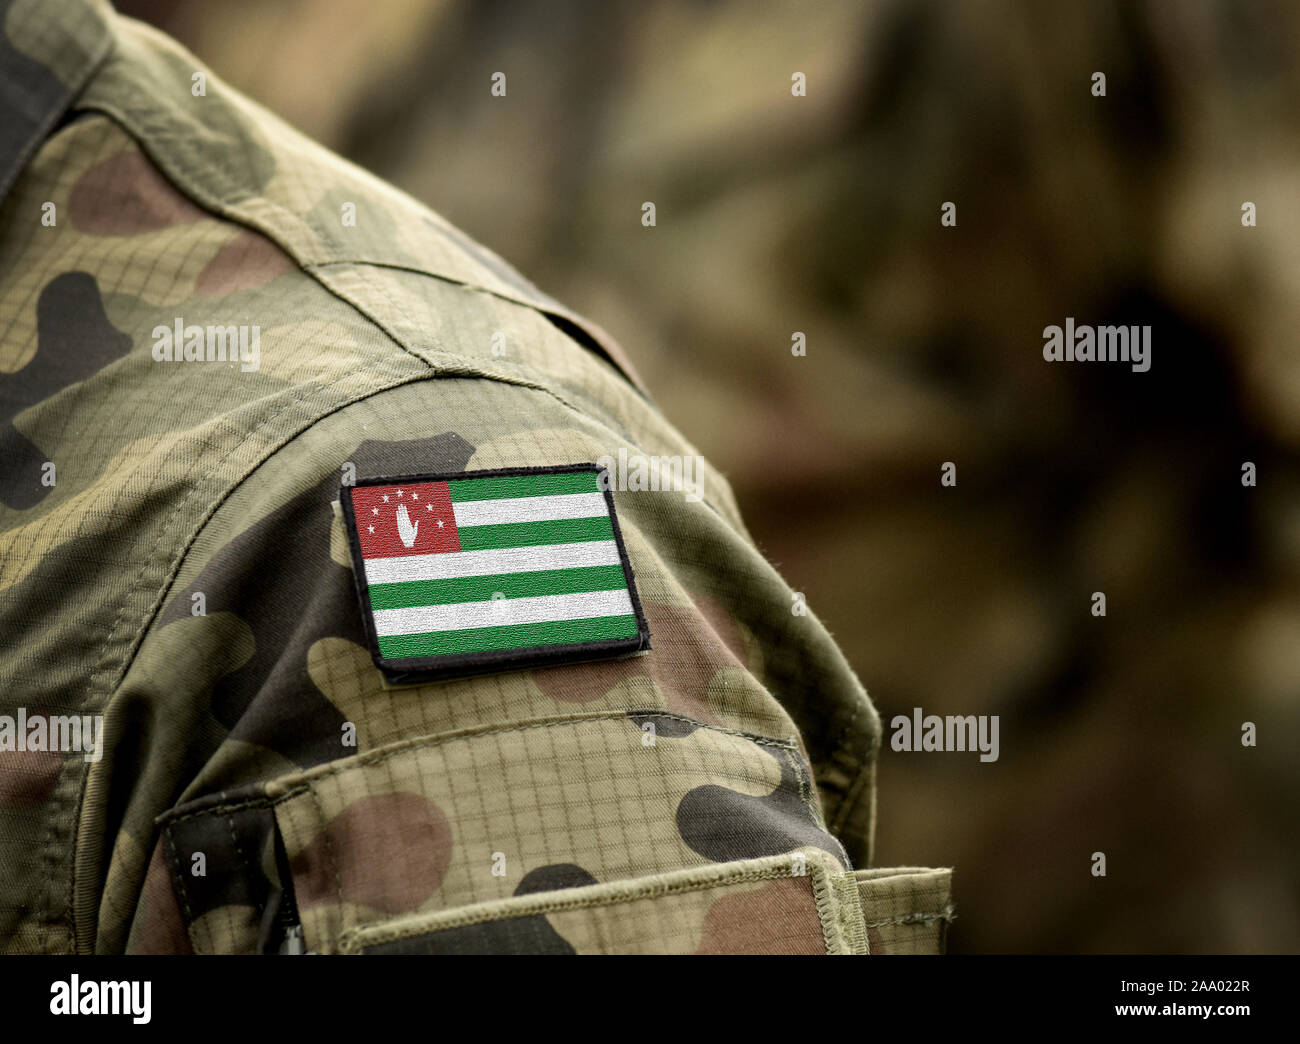 Flag of Republic of Abkhazia on military uniform. Army, armed forces, soldiers. Collage. Stock Photo